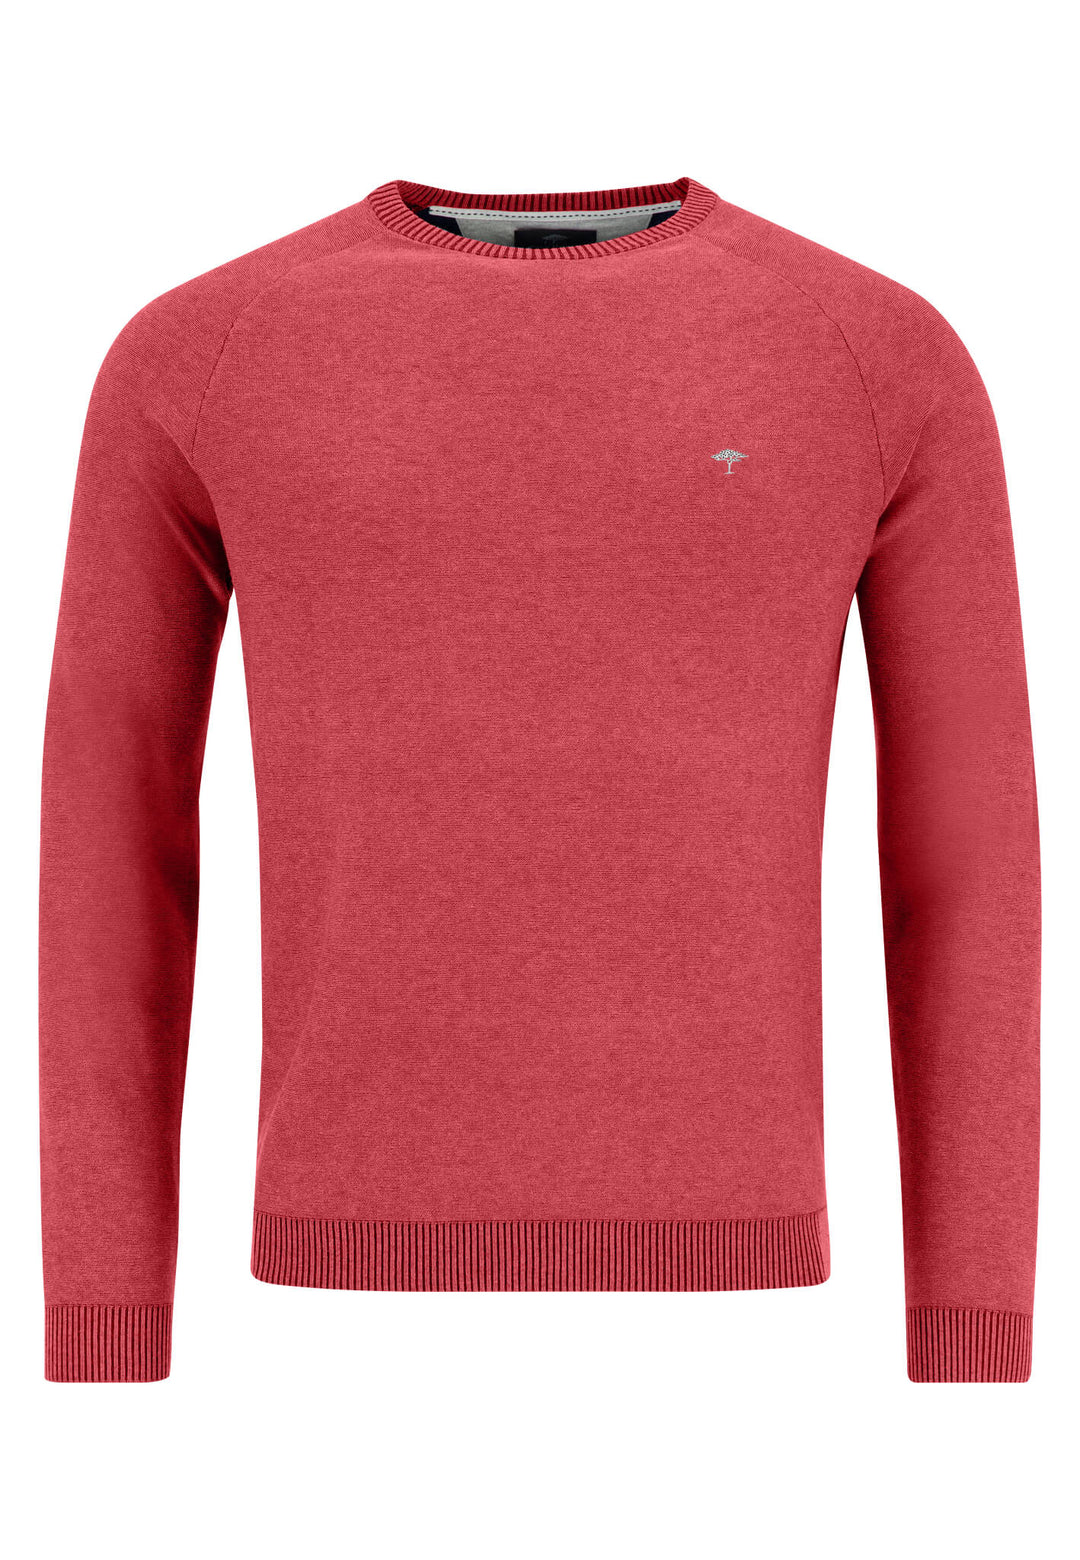 FYNCH-HATTON sweater made of fine cotton – FYNCH-HATTON | Outlet